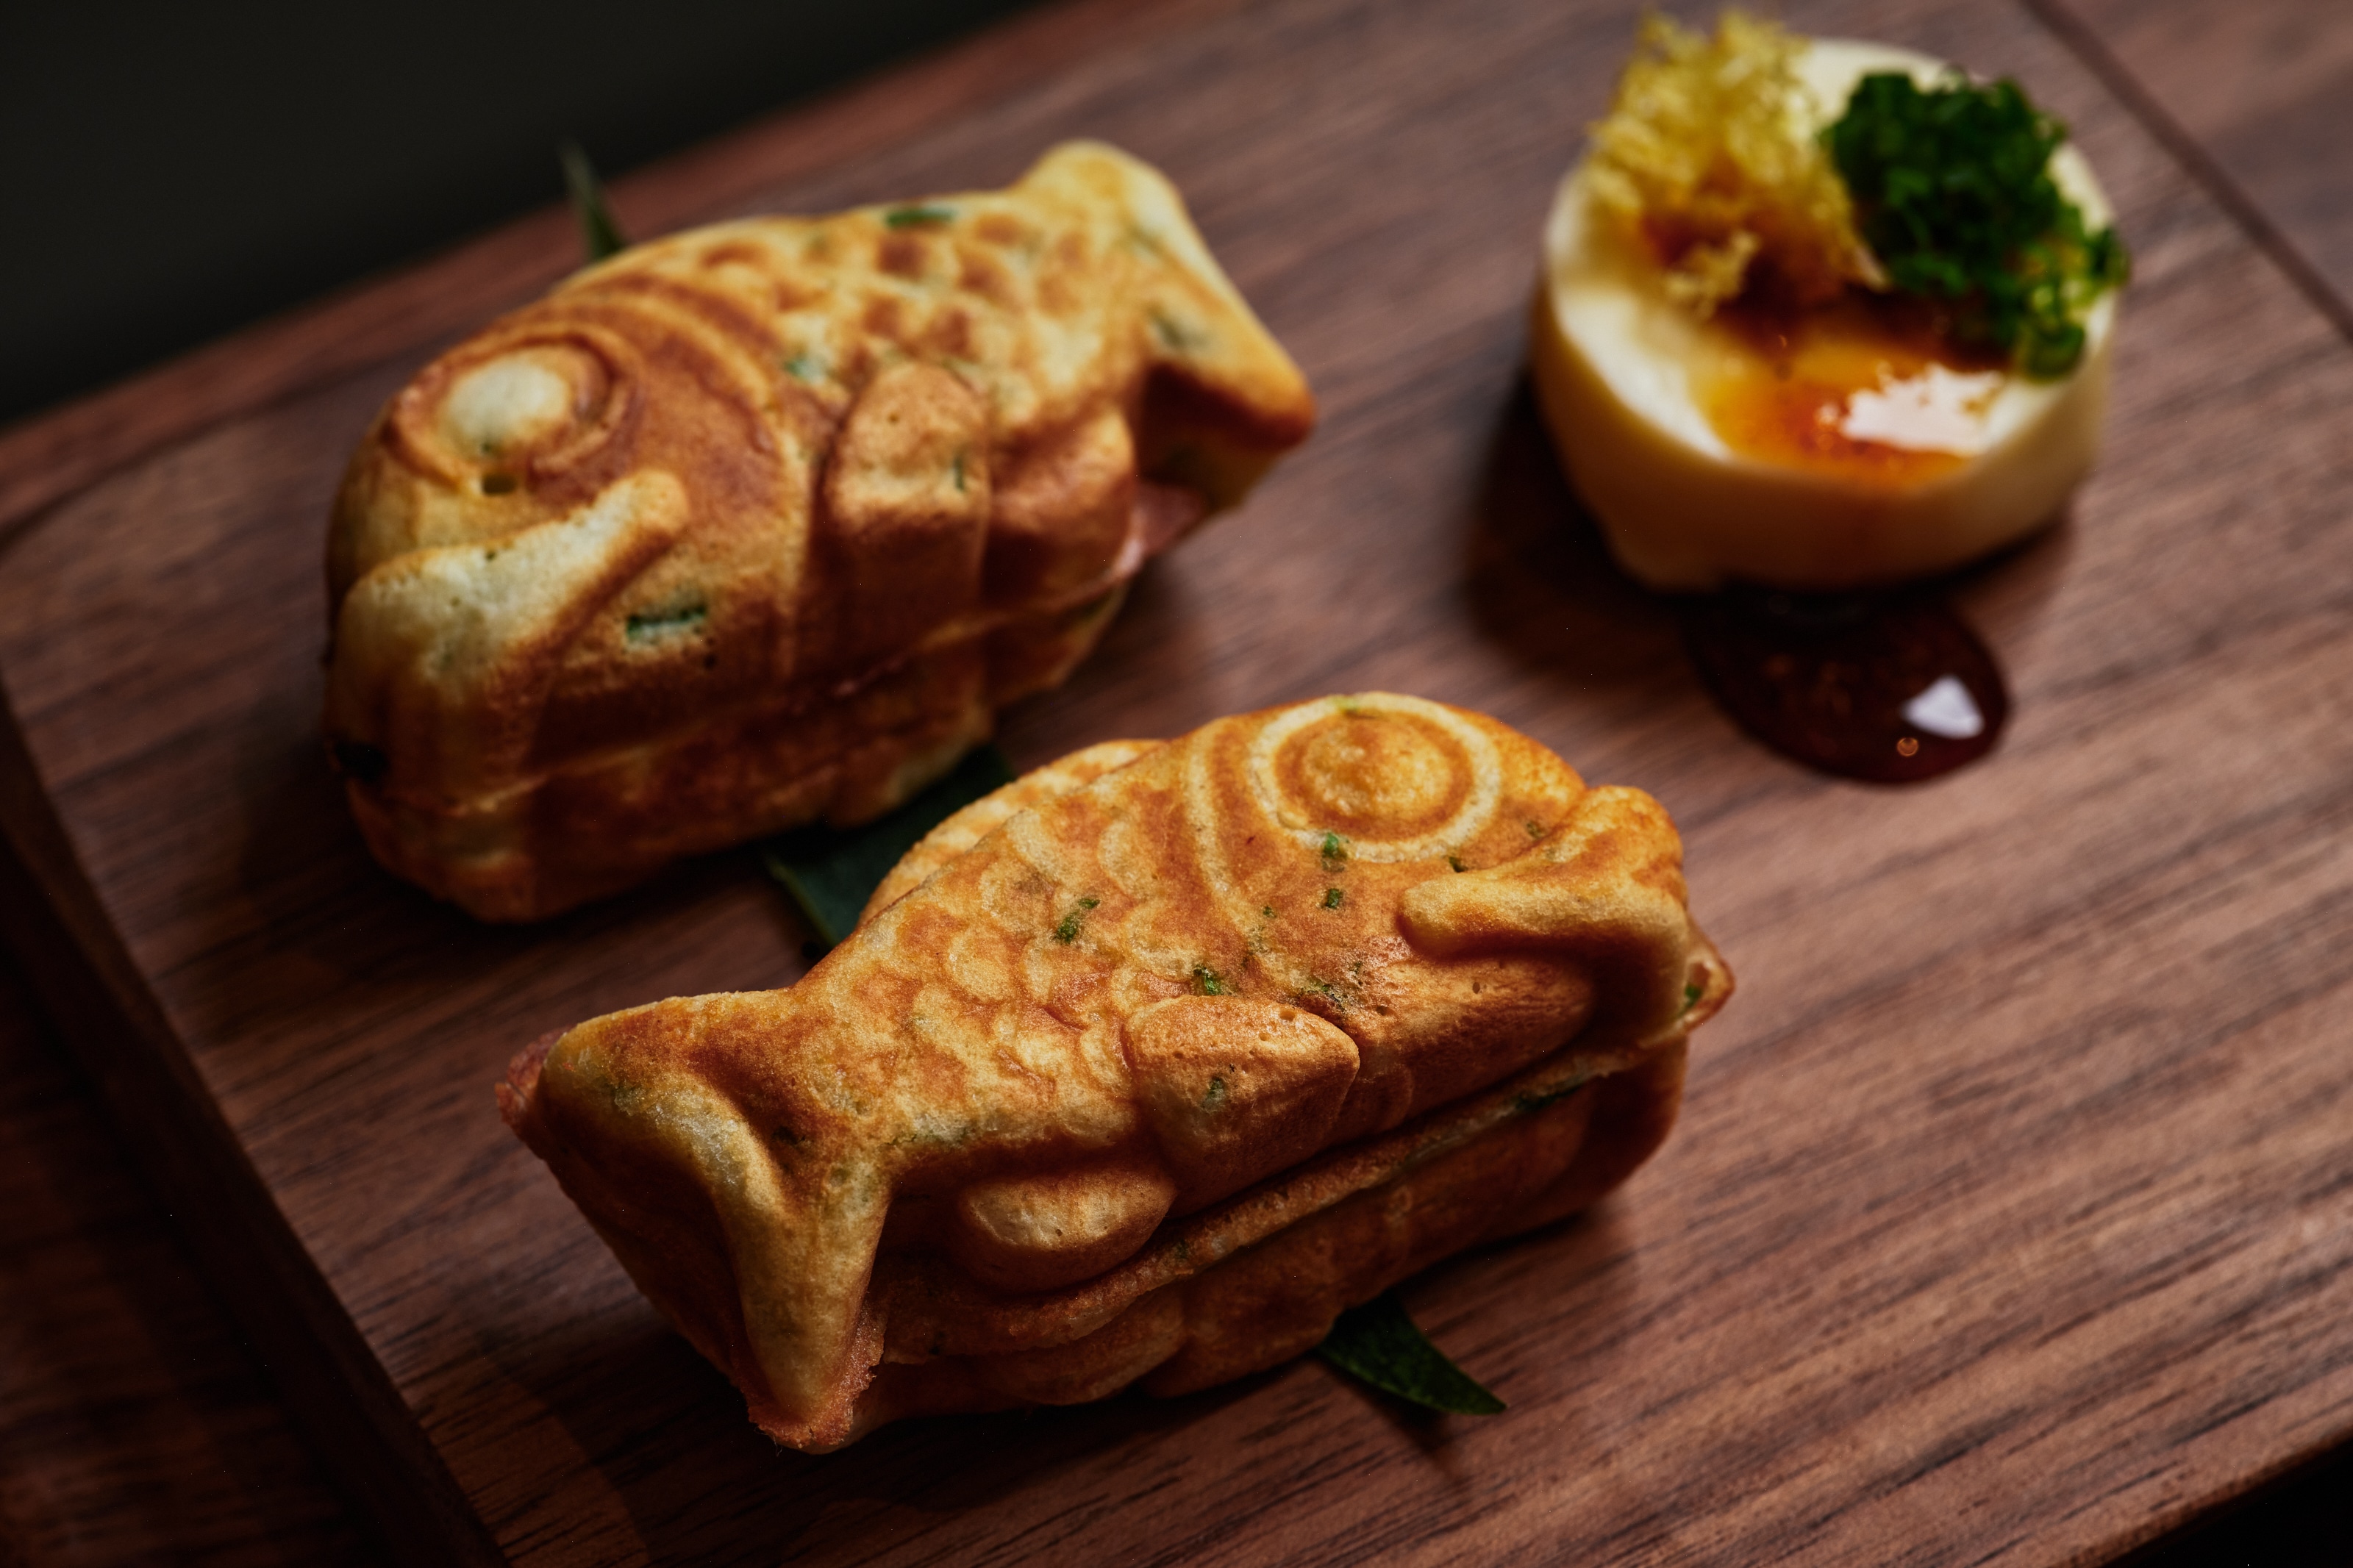 Taiyaki served on a wooden plate.